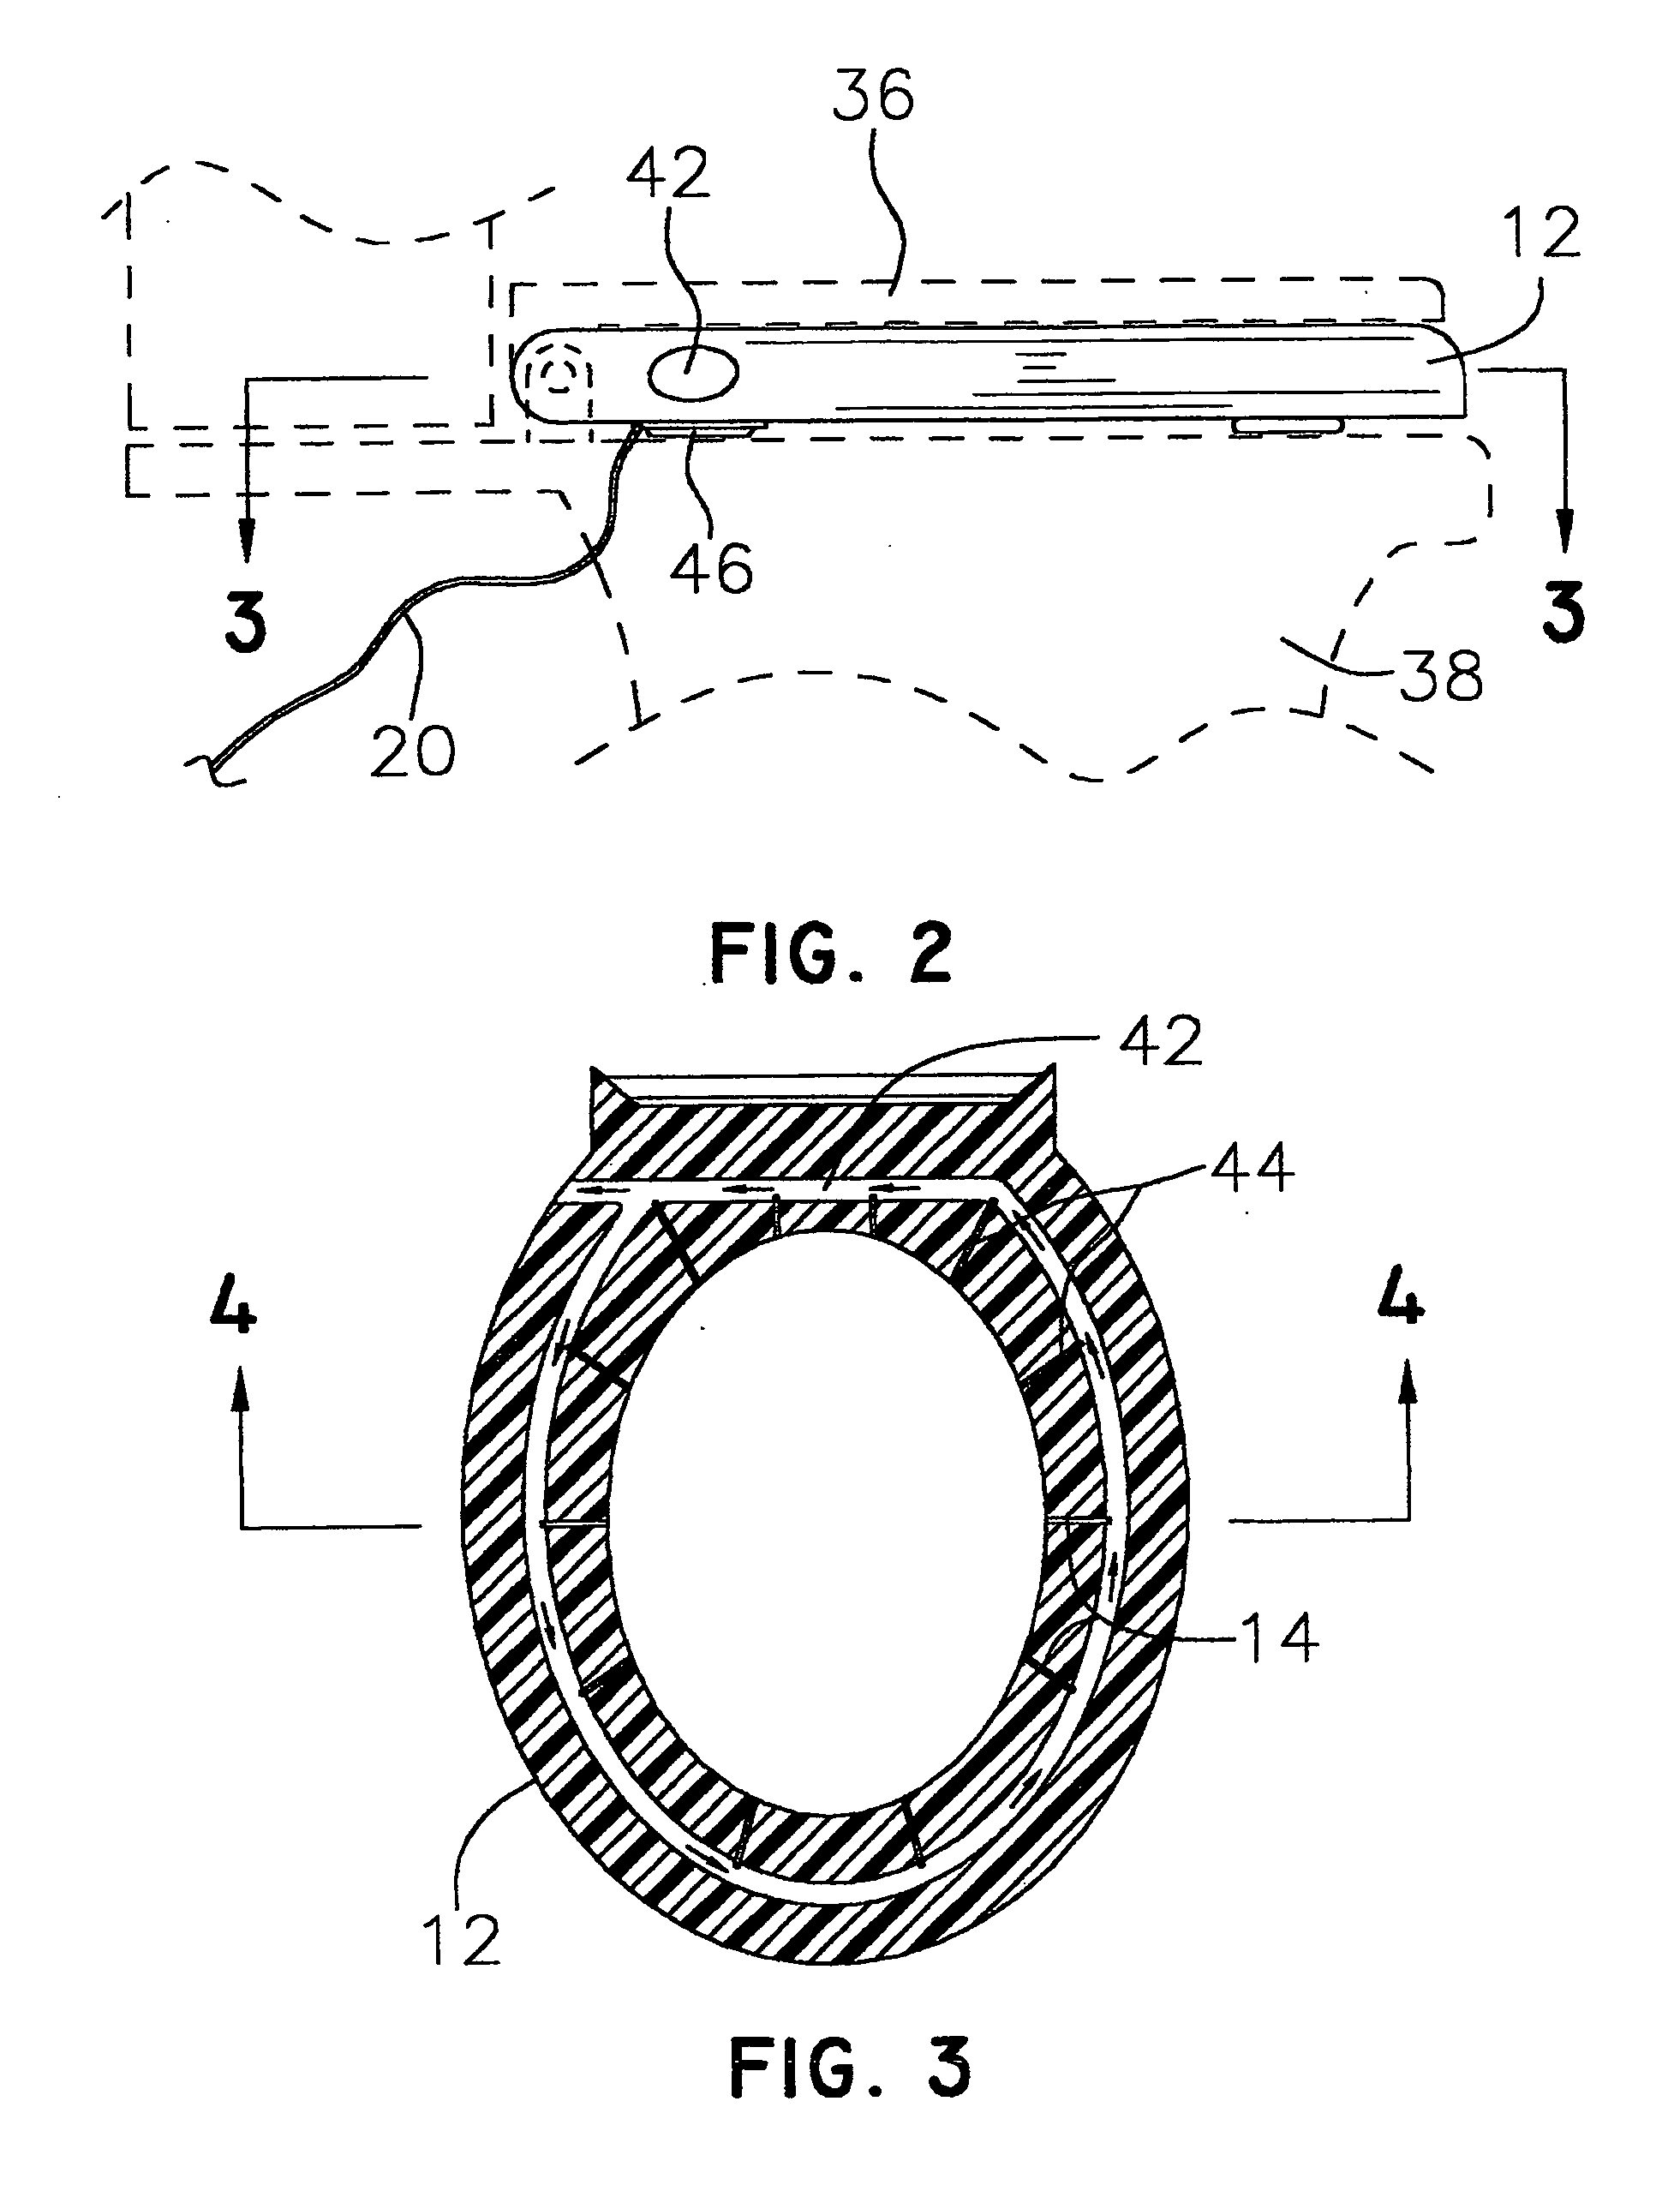 Ventilating apparatus for a toilet